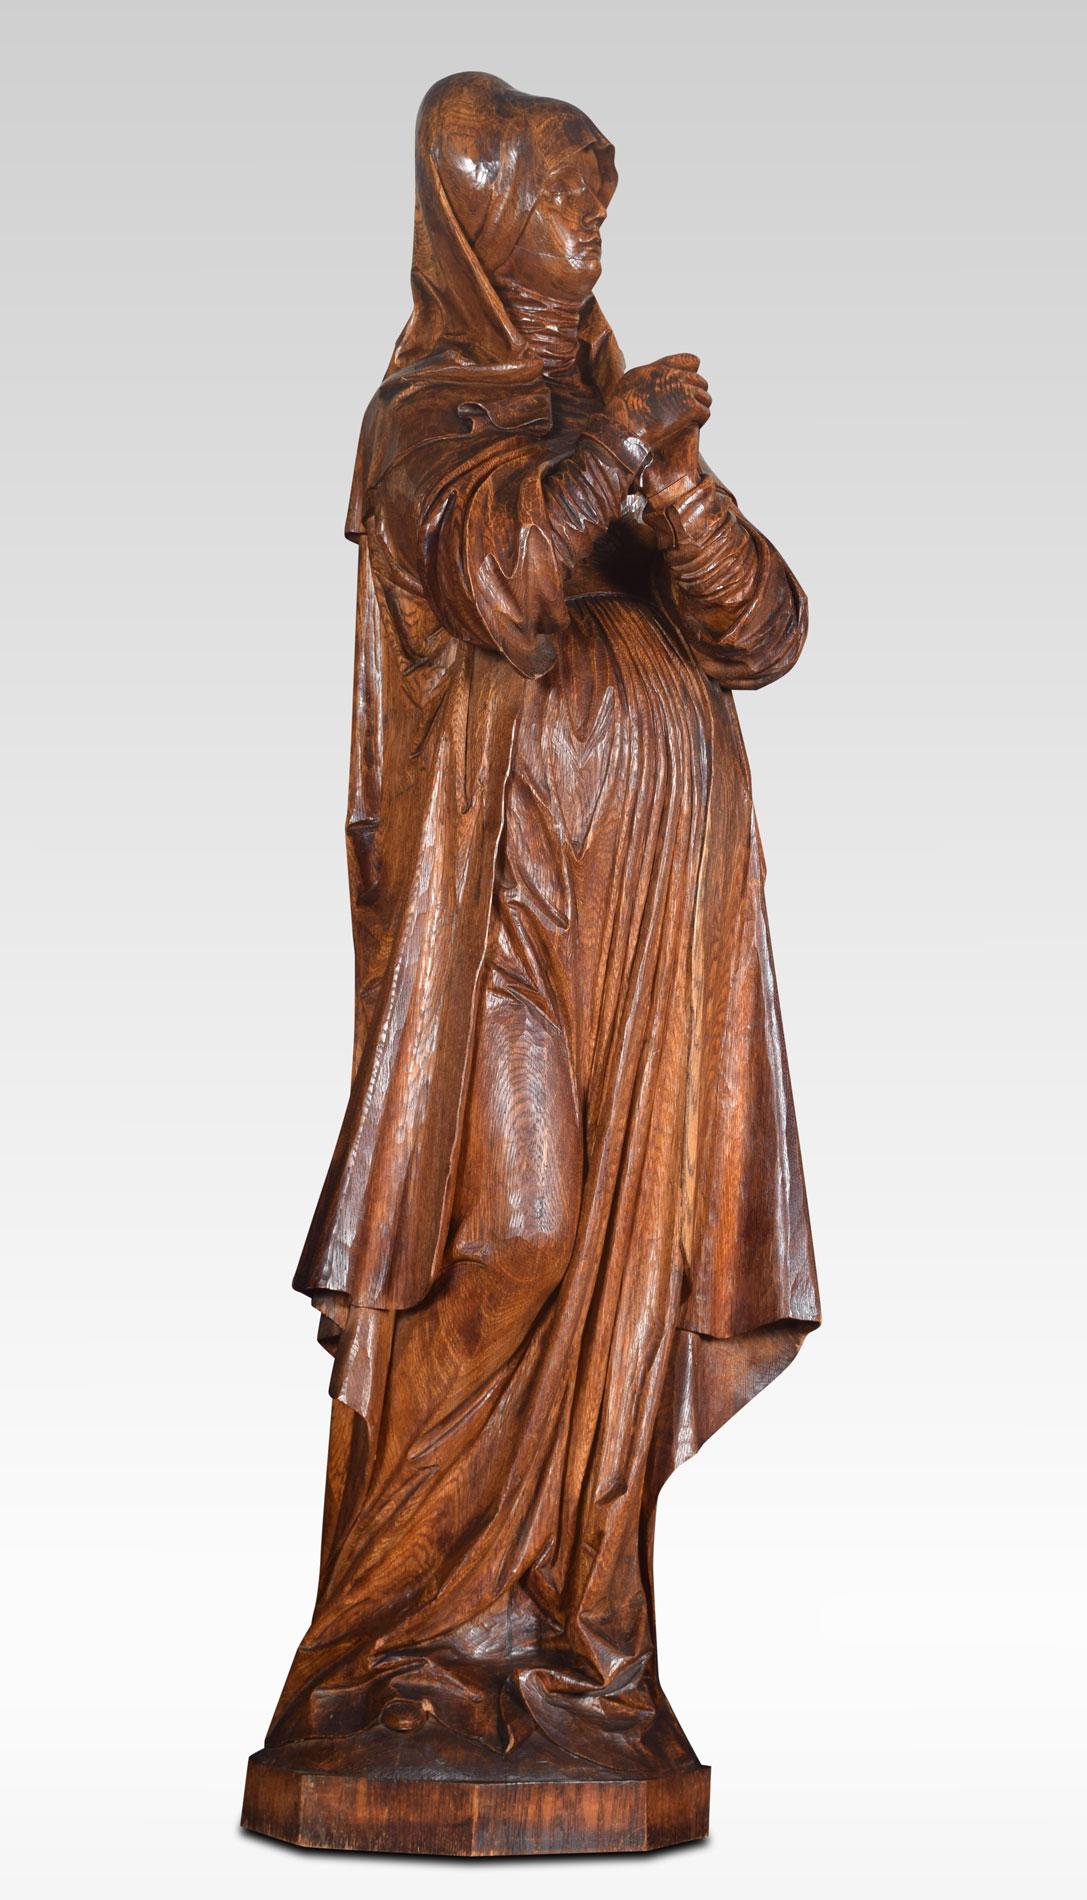 Very large 19th century carved oak figure of a saint in traditional dress all raised up on octagonal base.
Dimensions:
Height 60 inches
Length 18 inches
width 18 inches.